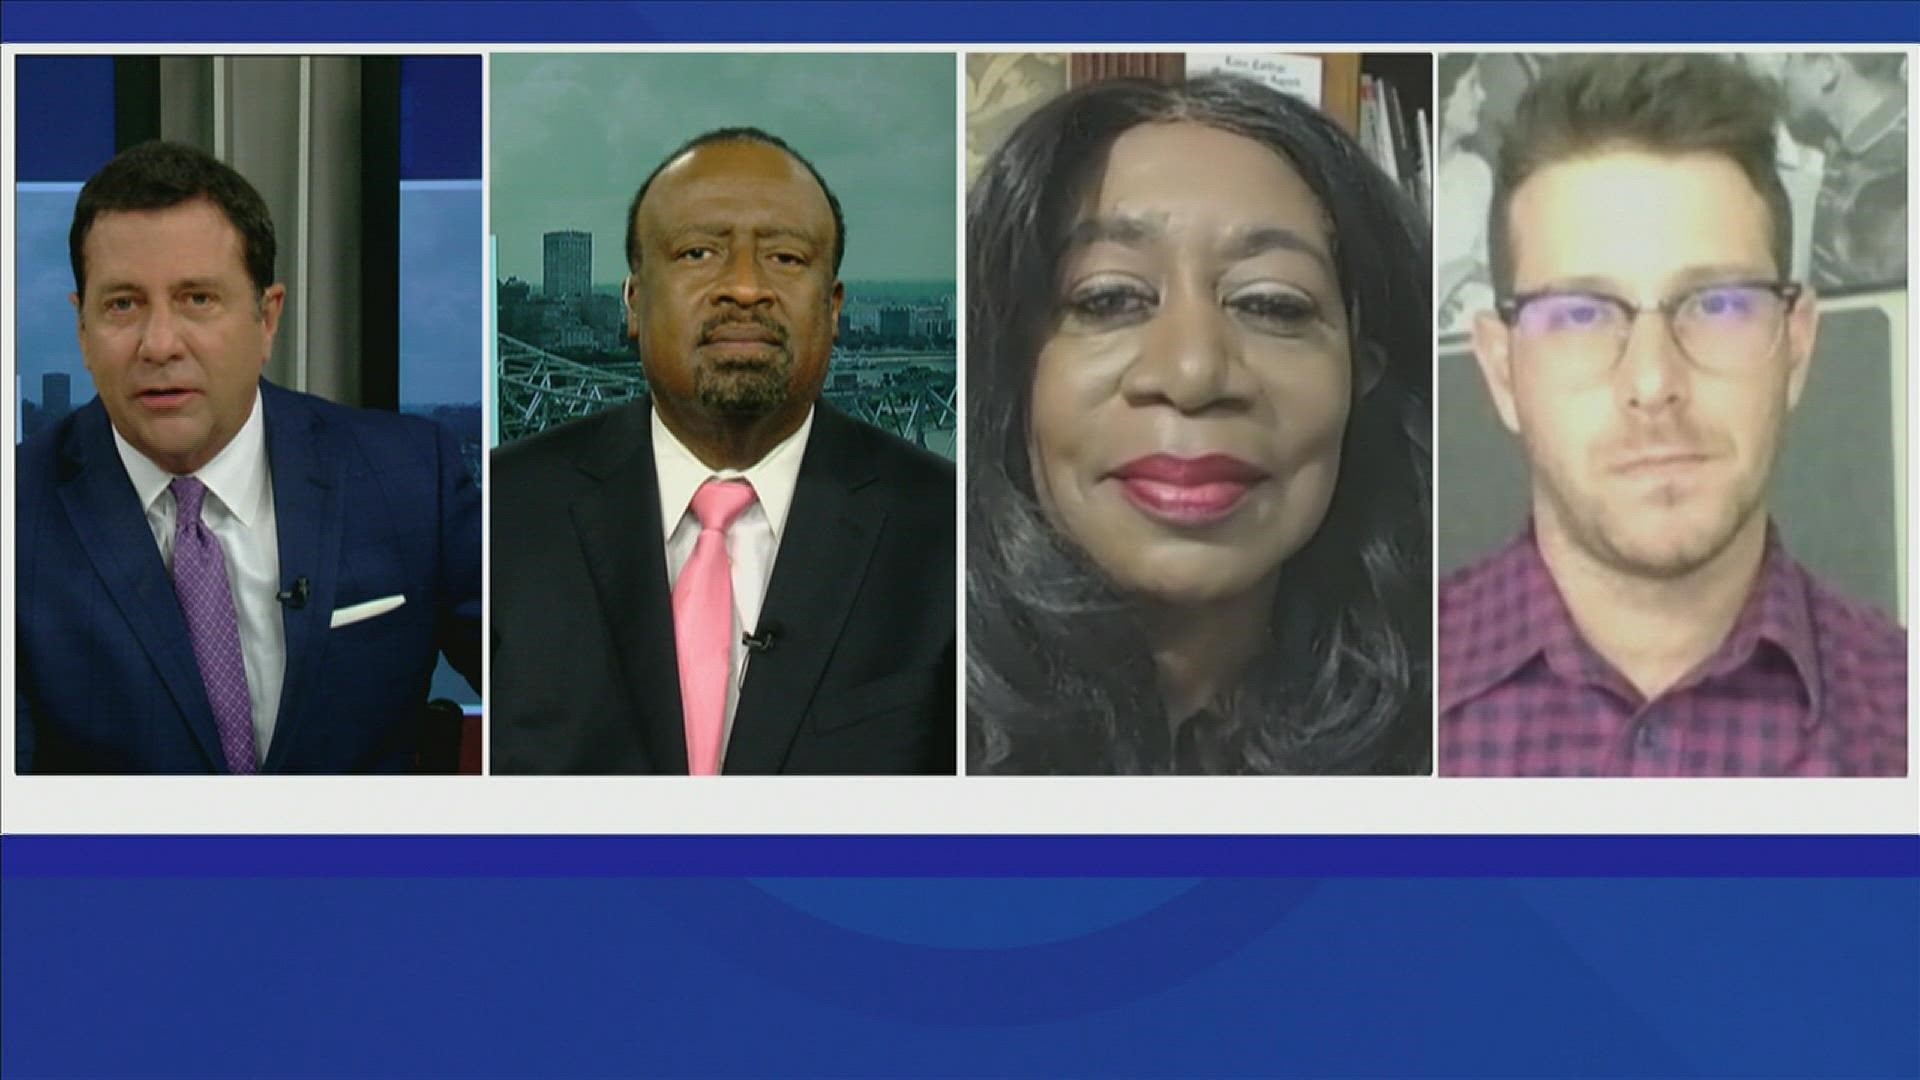 ABC24 News Anchor Richard Ransom is joined by his panelists to discuss Mayor Strickland's hesitation to require first responders to be vaccinated.